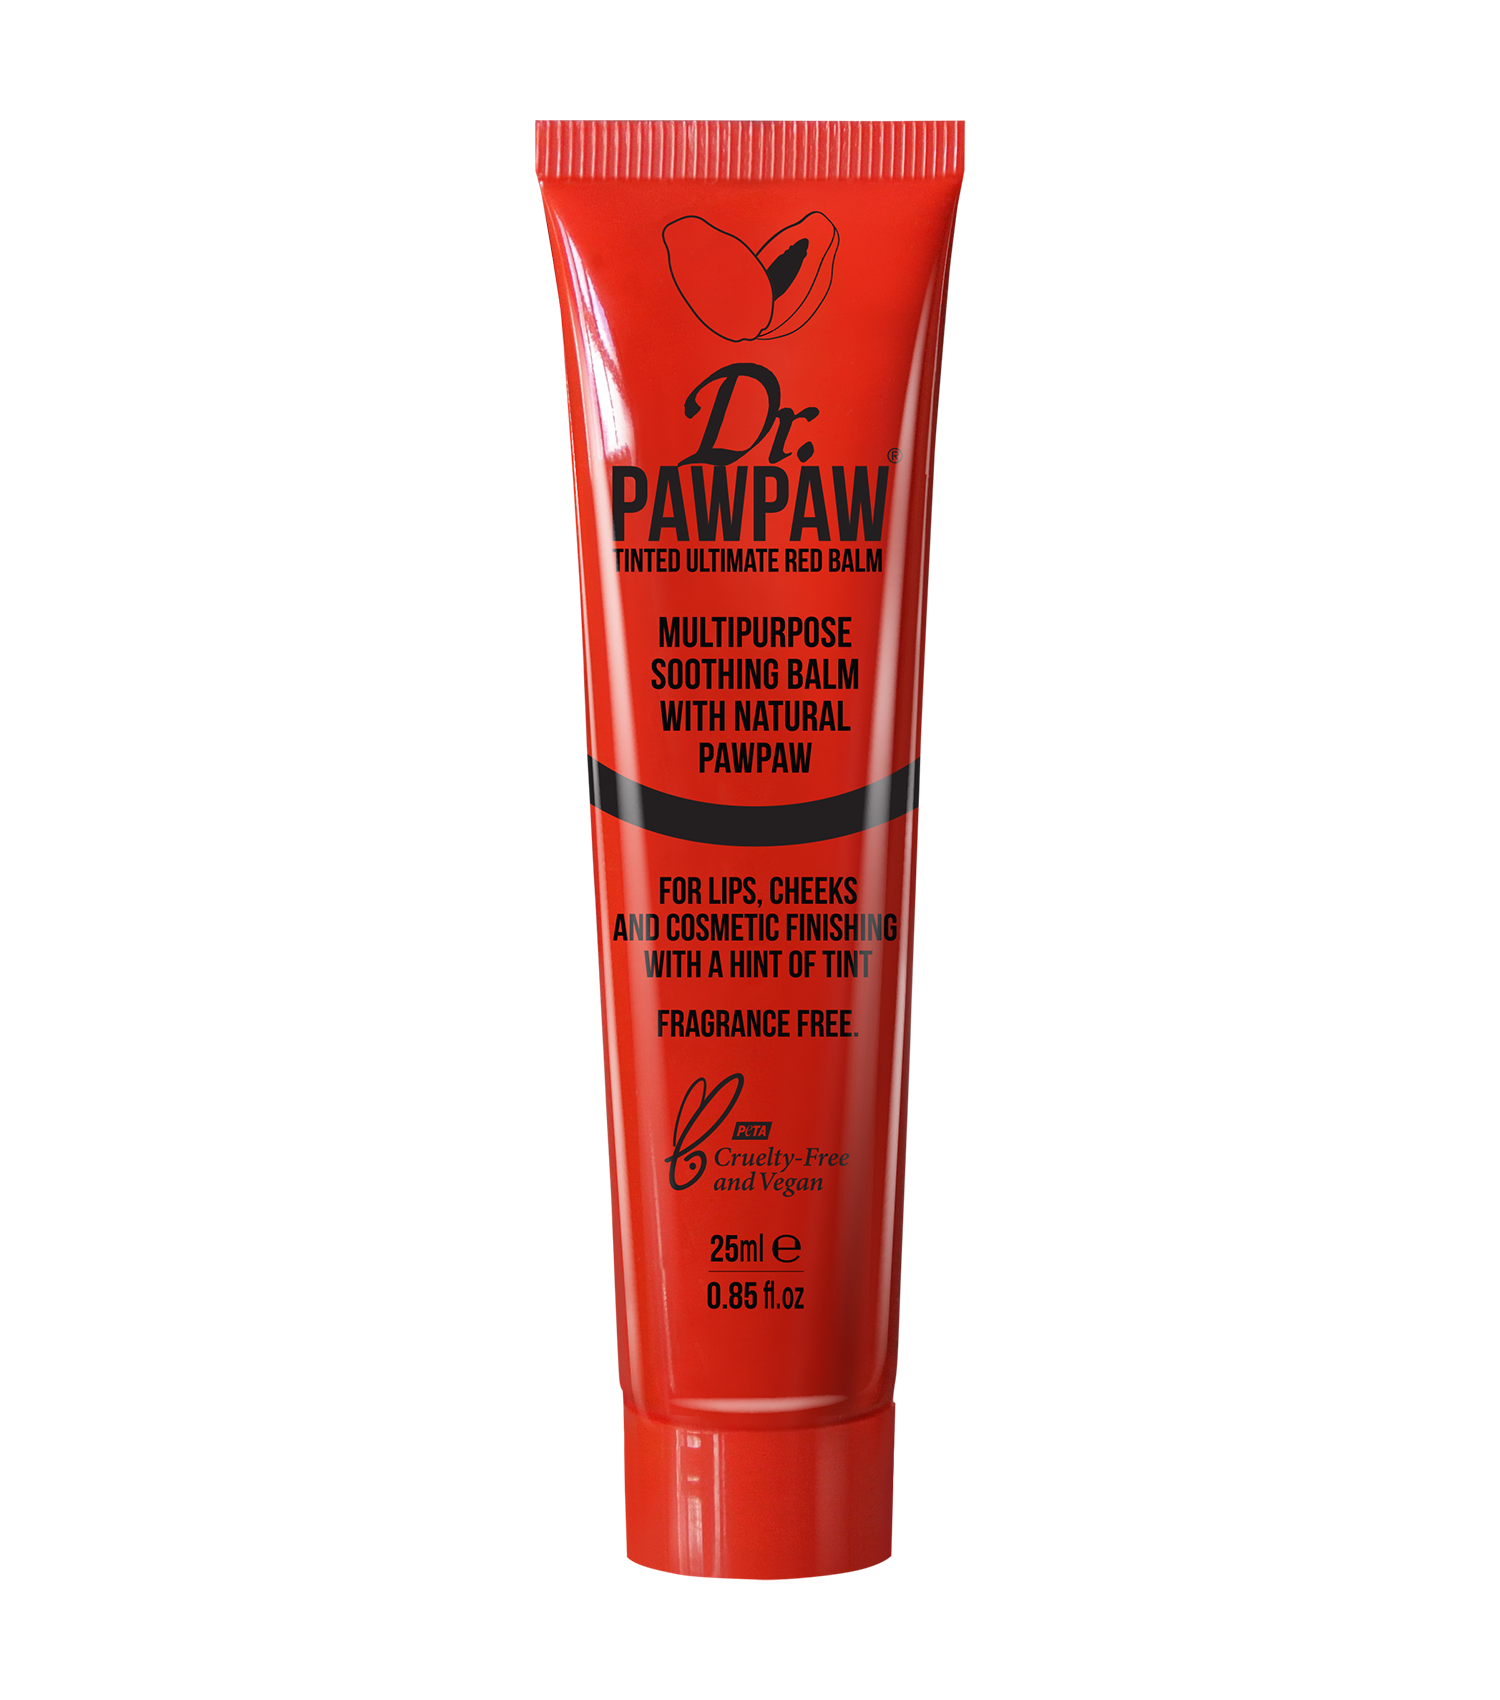 Dr. Pawpaw Ultimate Red balm